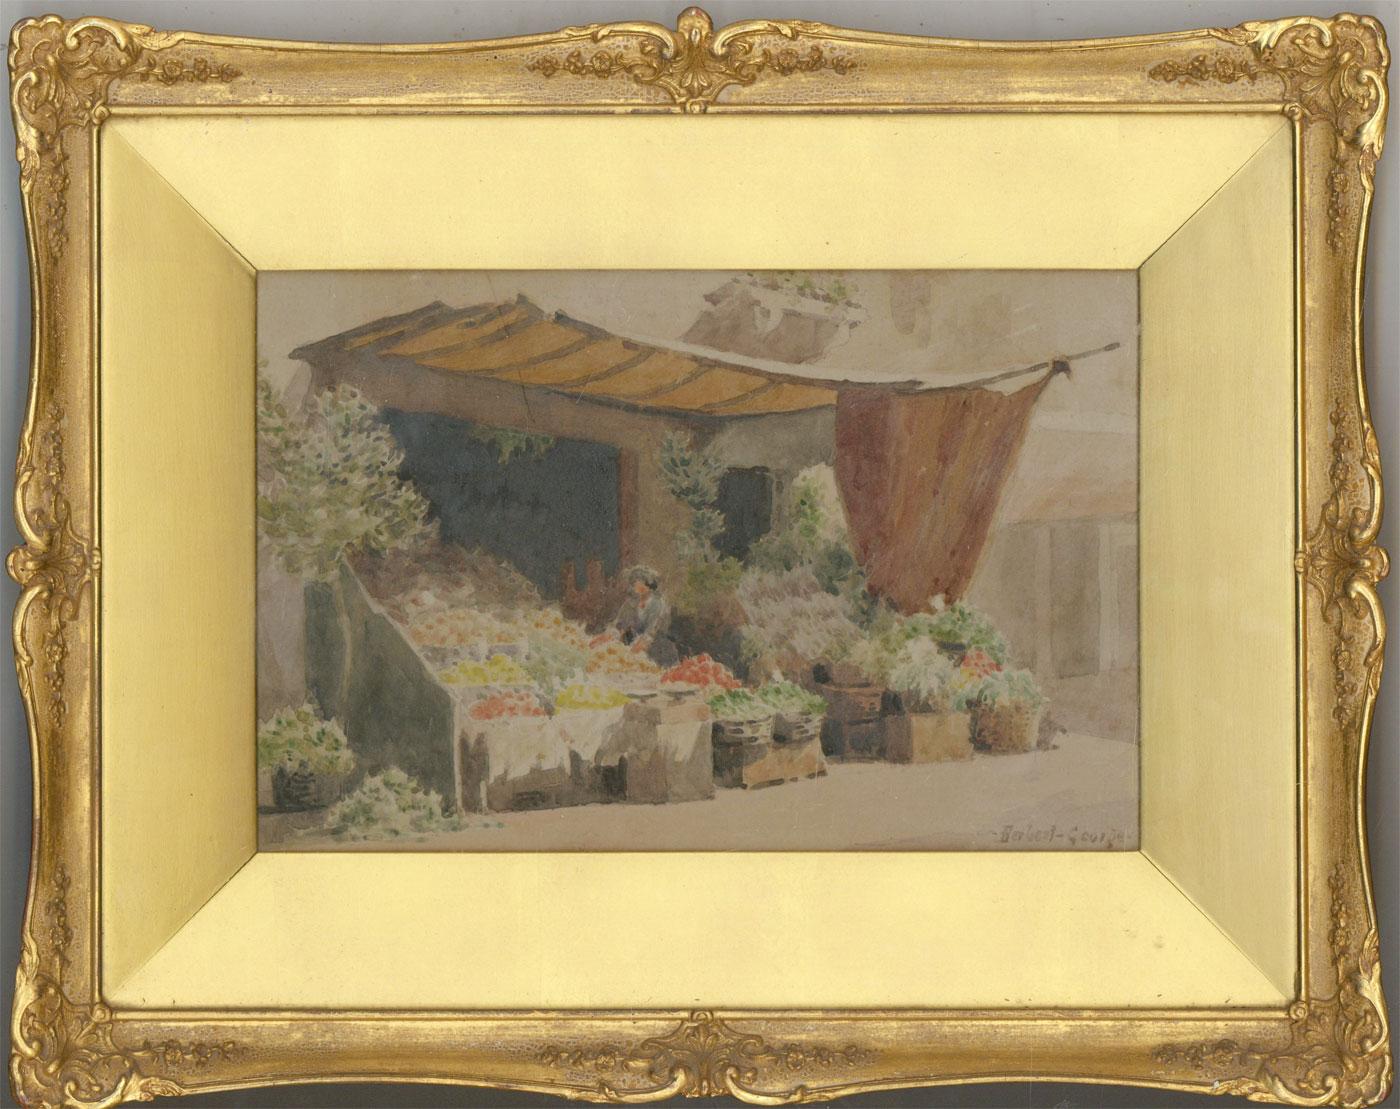 A charming watercolour study by British artist Herbert George (fl.1906-1939). The artist has pictured the vibrant tones and textures of the vegetable stall in his distinctive impressionistic style. Impressively presented in an ornate Rococo style